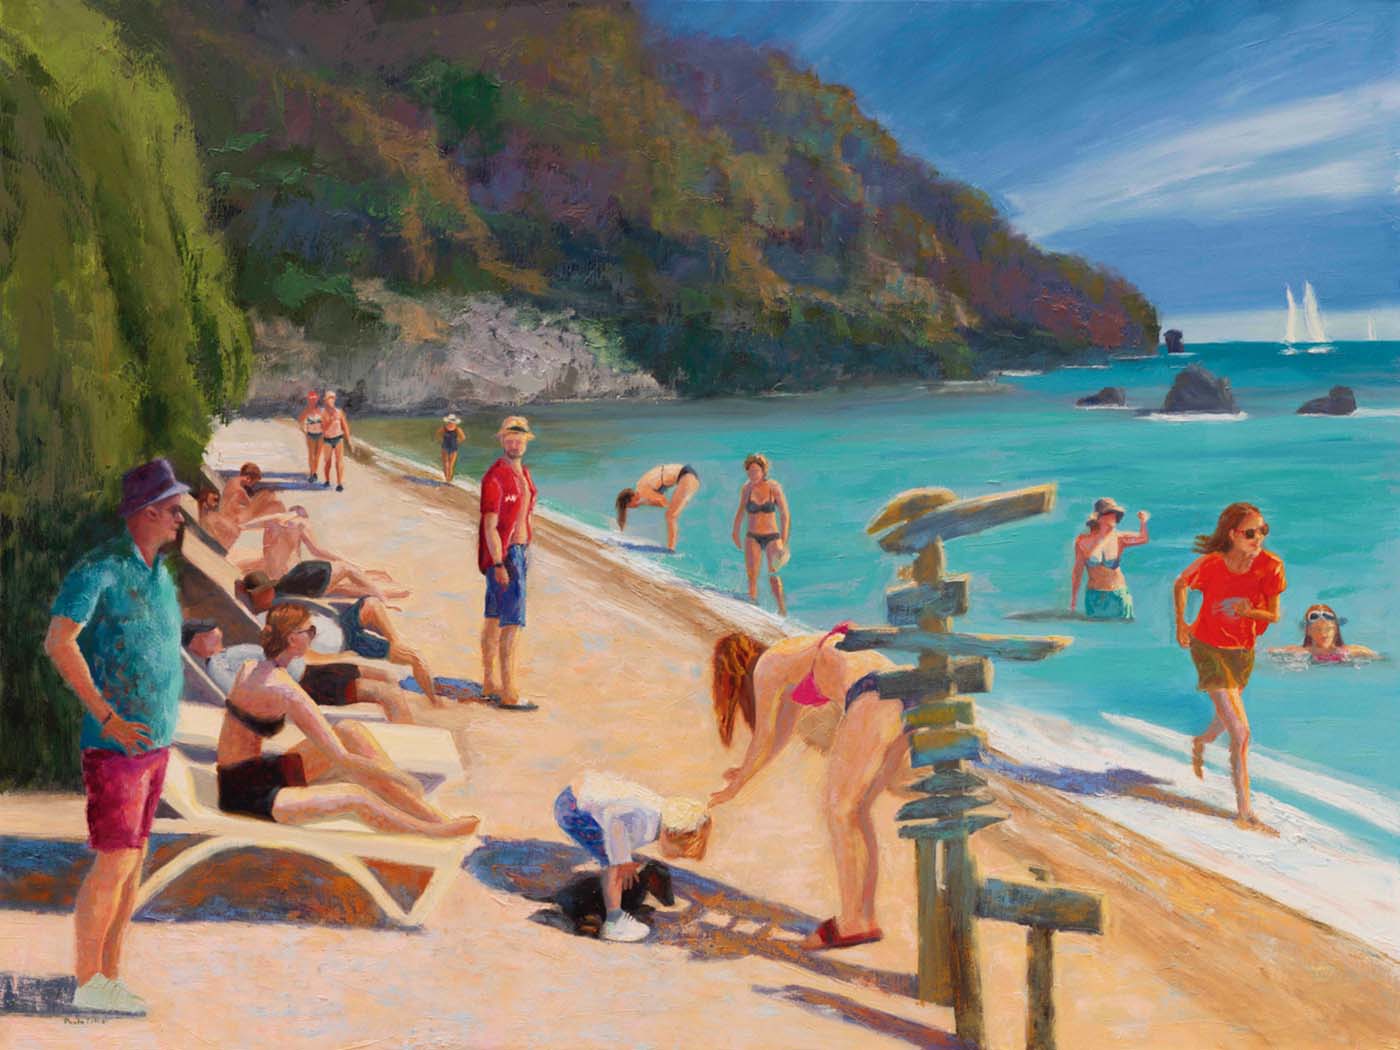 oil painting of people on beach; signs in front of viewer